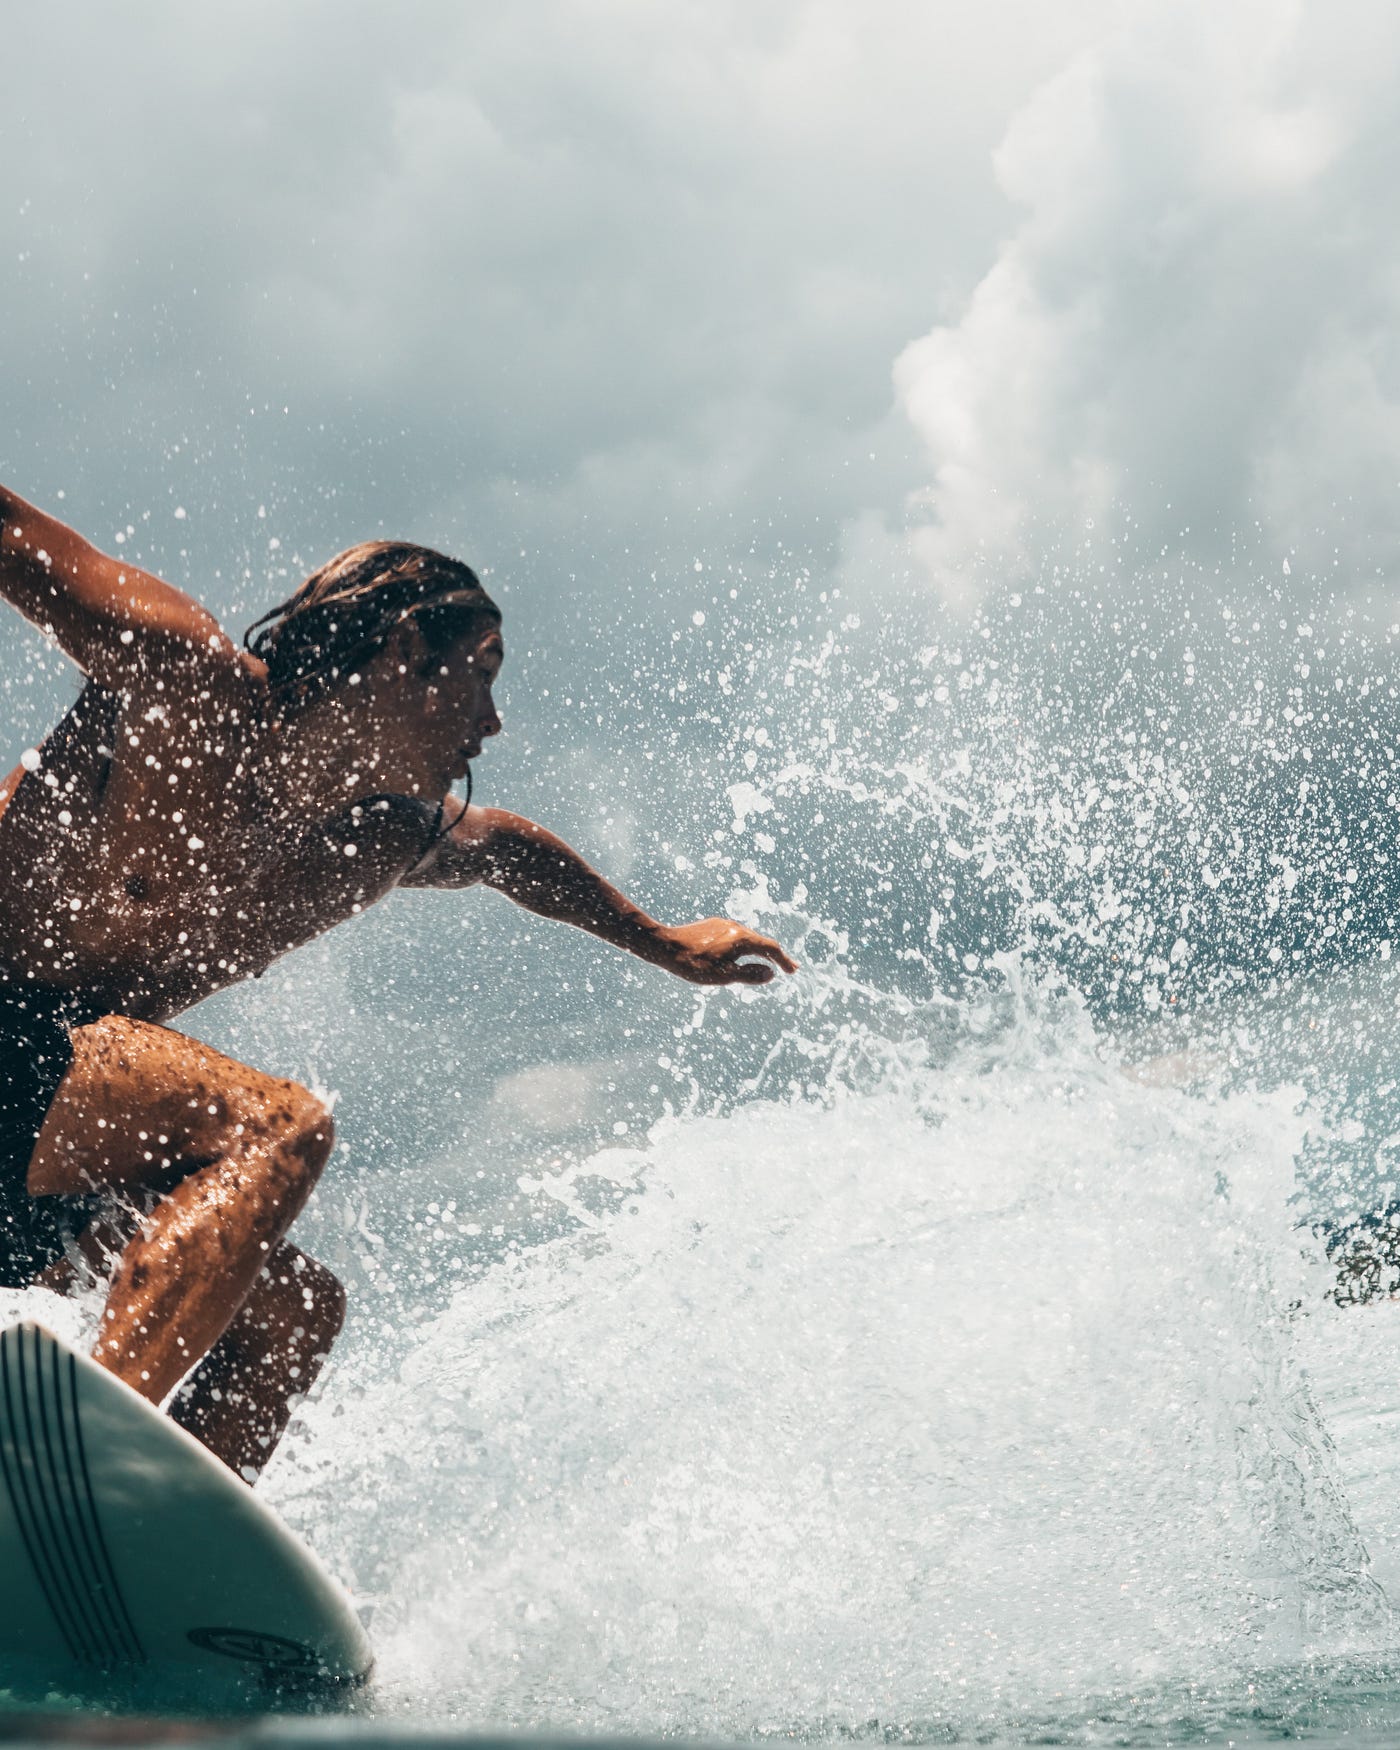 15 Useful Tips for Beginning Surfers